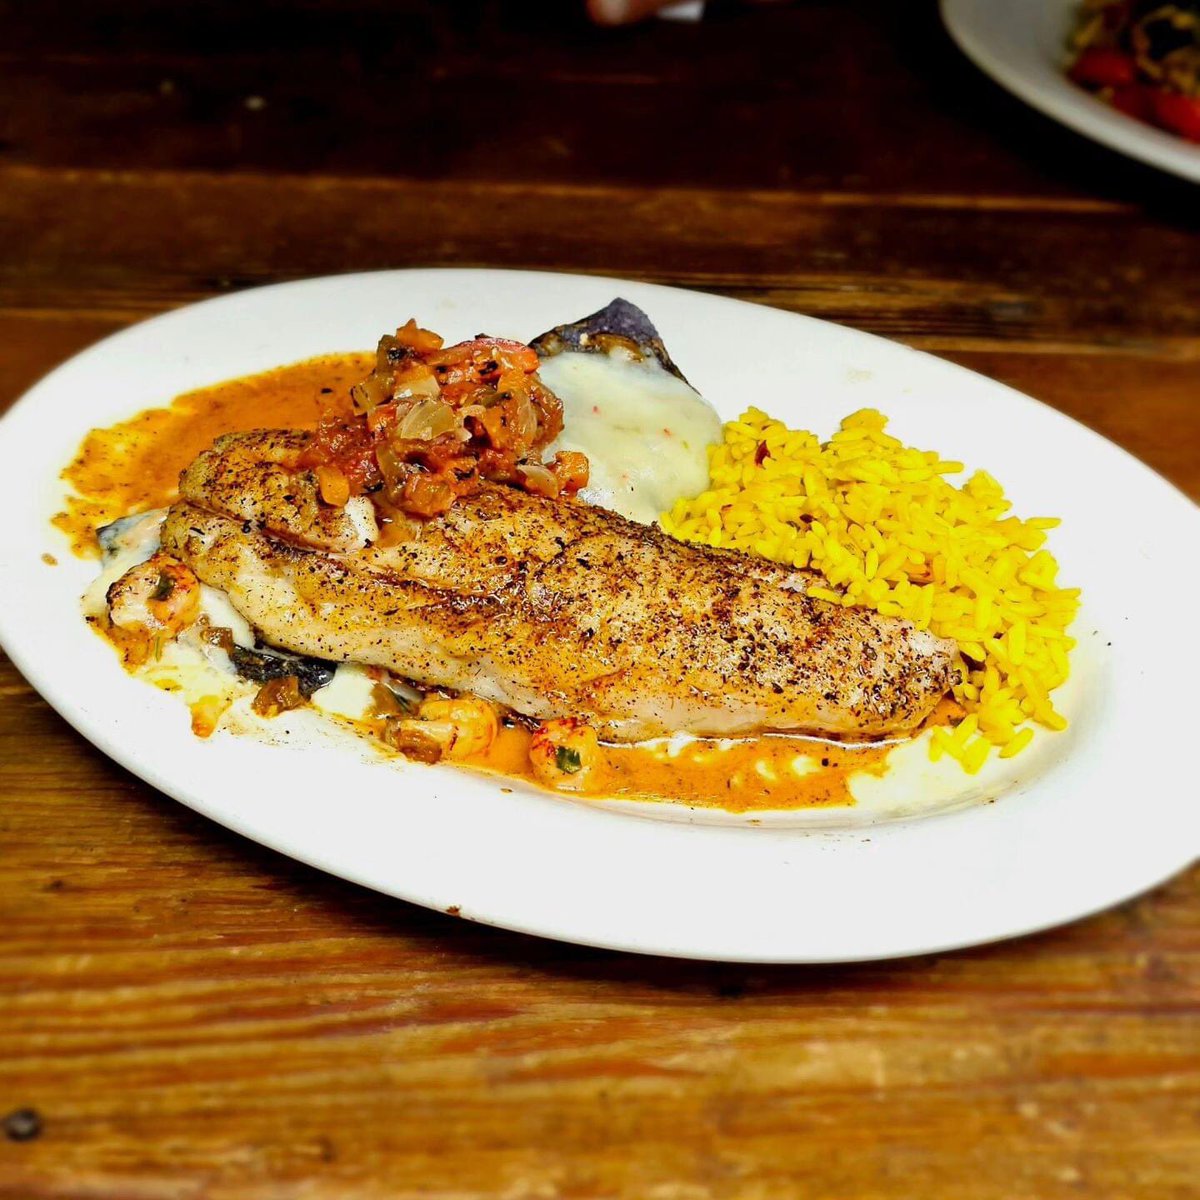 We're nearing the end of crawfish season 😩 Come in and grab a crawfish enchilada with a seared filet of speckled trout while we still got it! #fog #nolaeats #goodeats